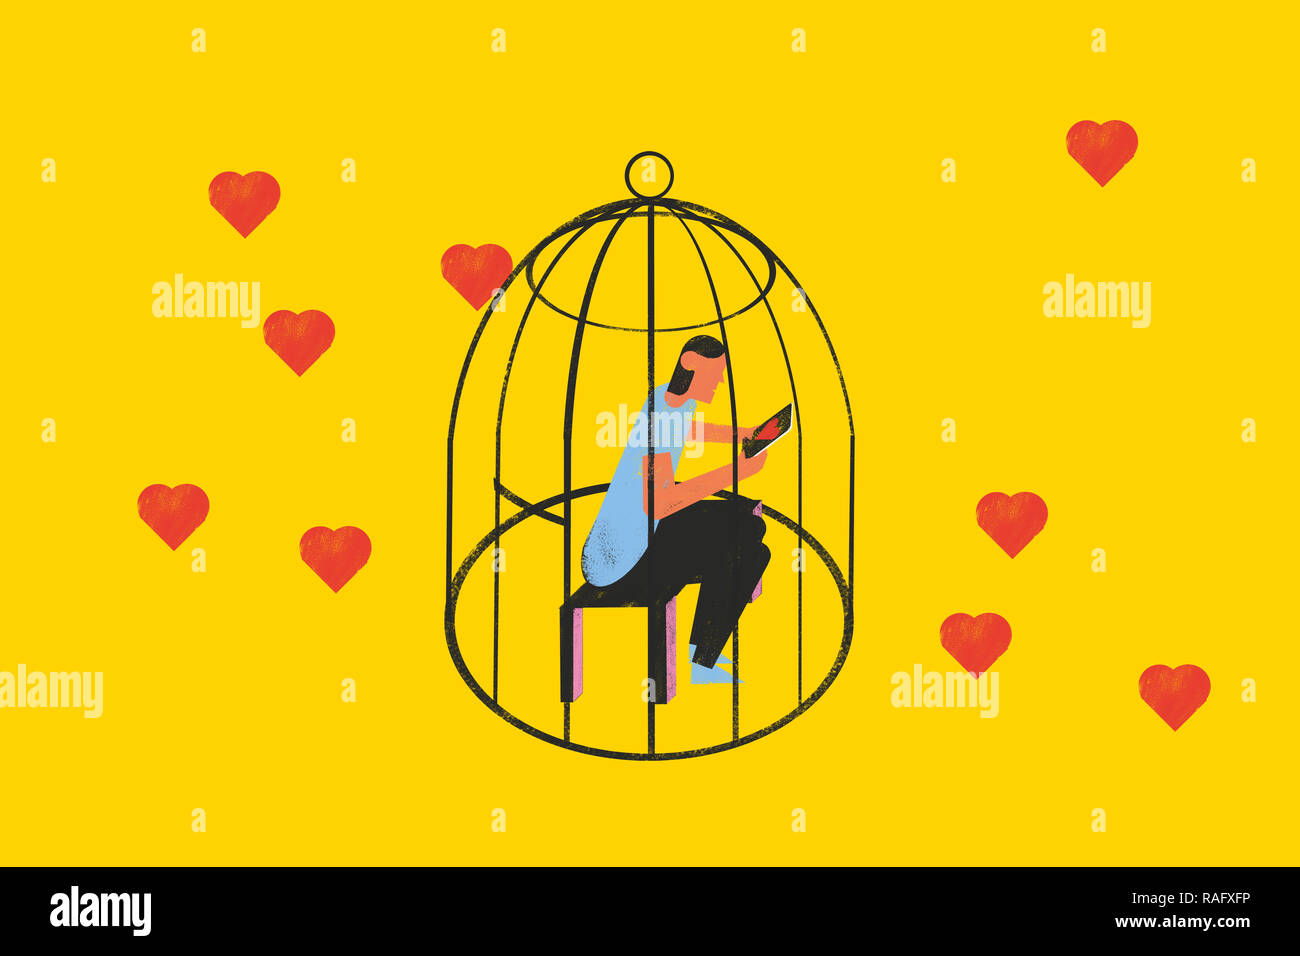 He did not pay attention to real love while searching for online dating. Conceptual illustration shows a person locked in a cage looking at the mobile Stock Photo